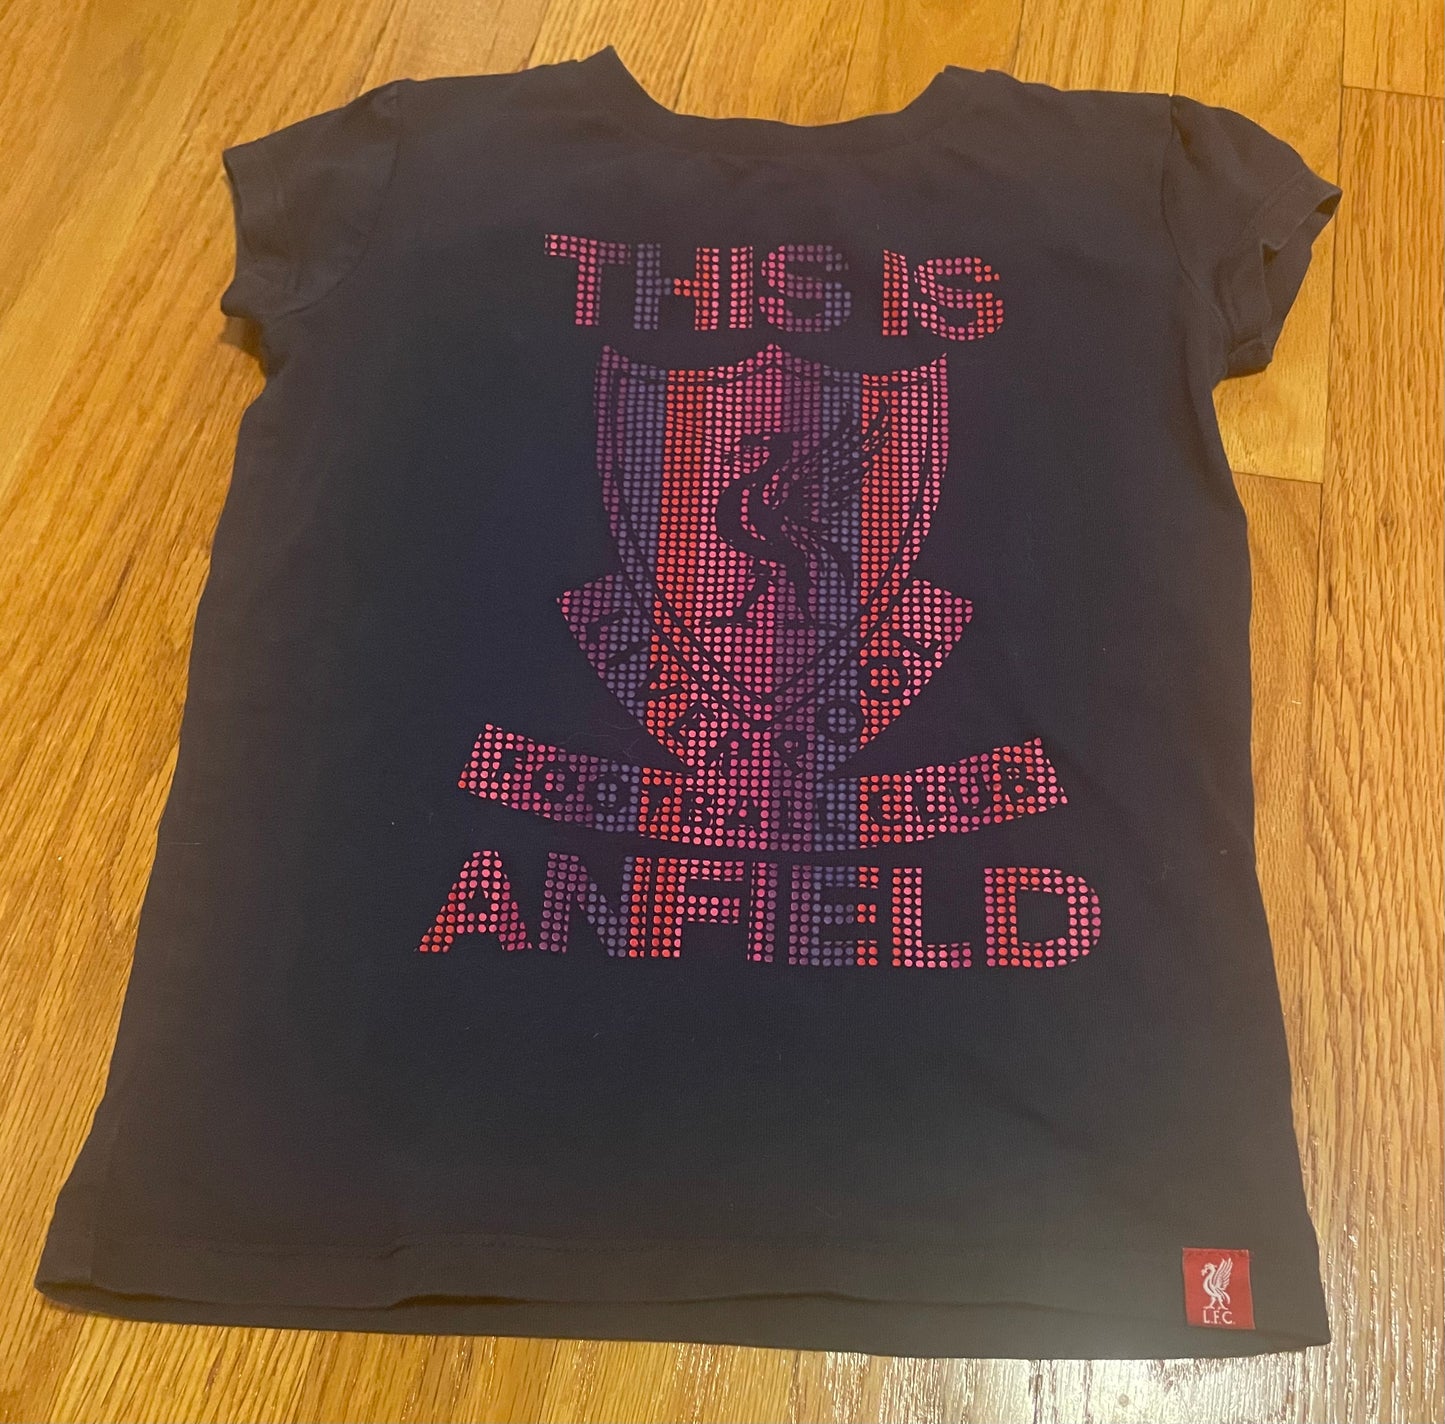 Size 5-6 years - Liverpool soccer shirt - pink / purple dots